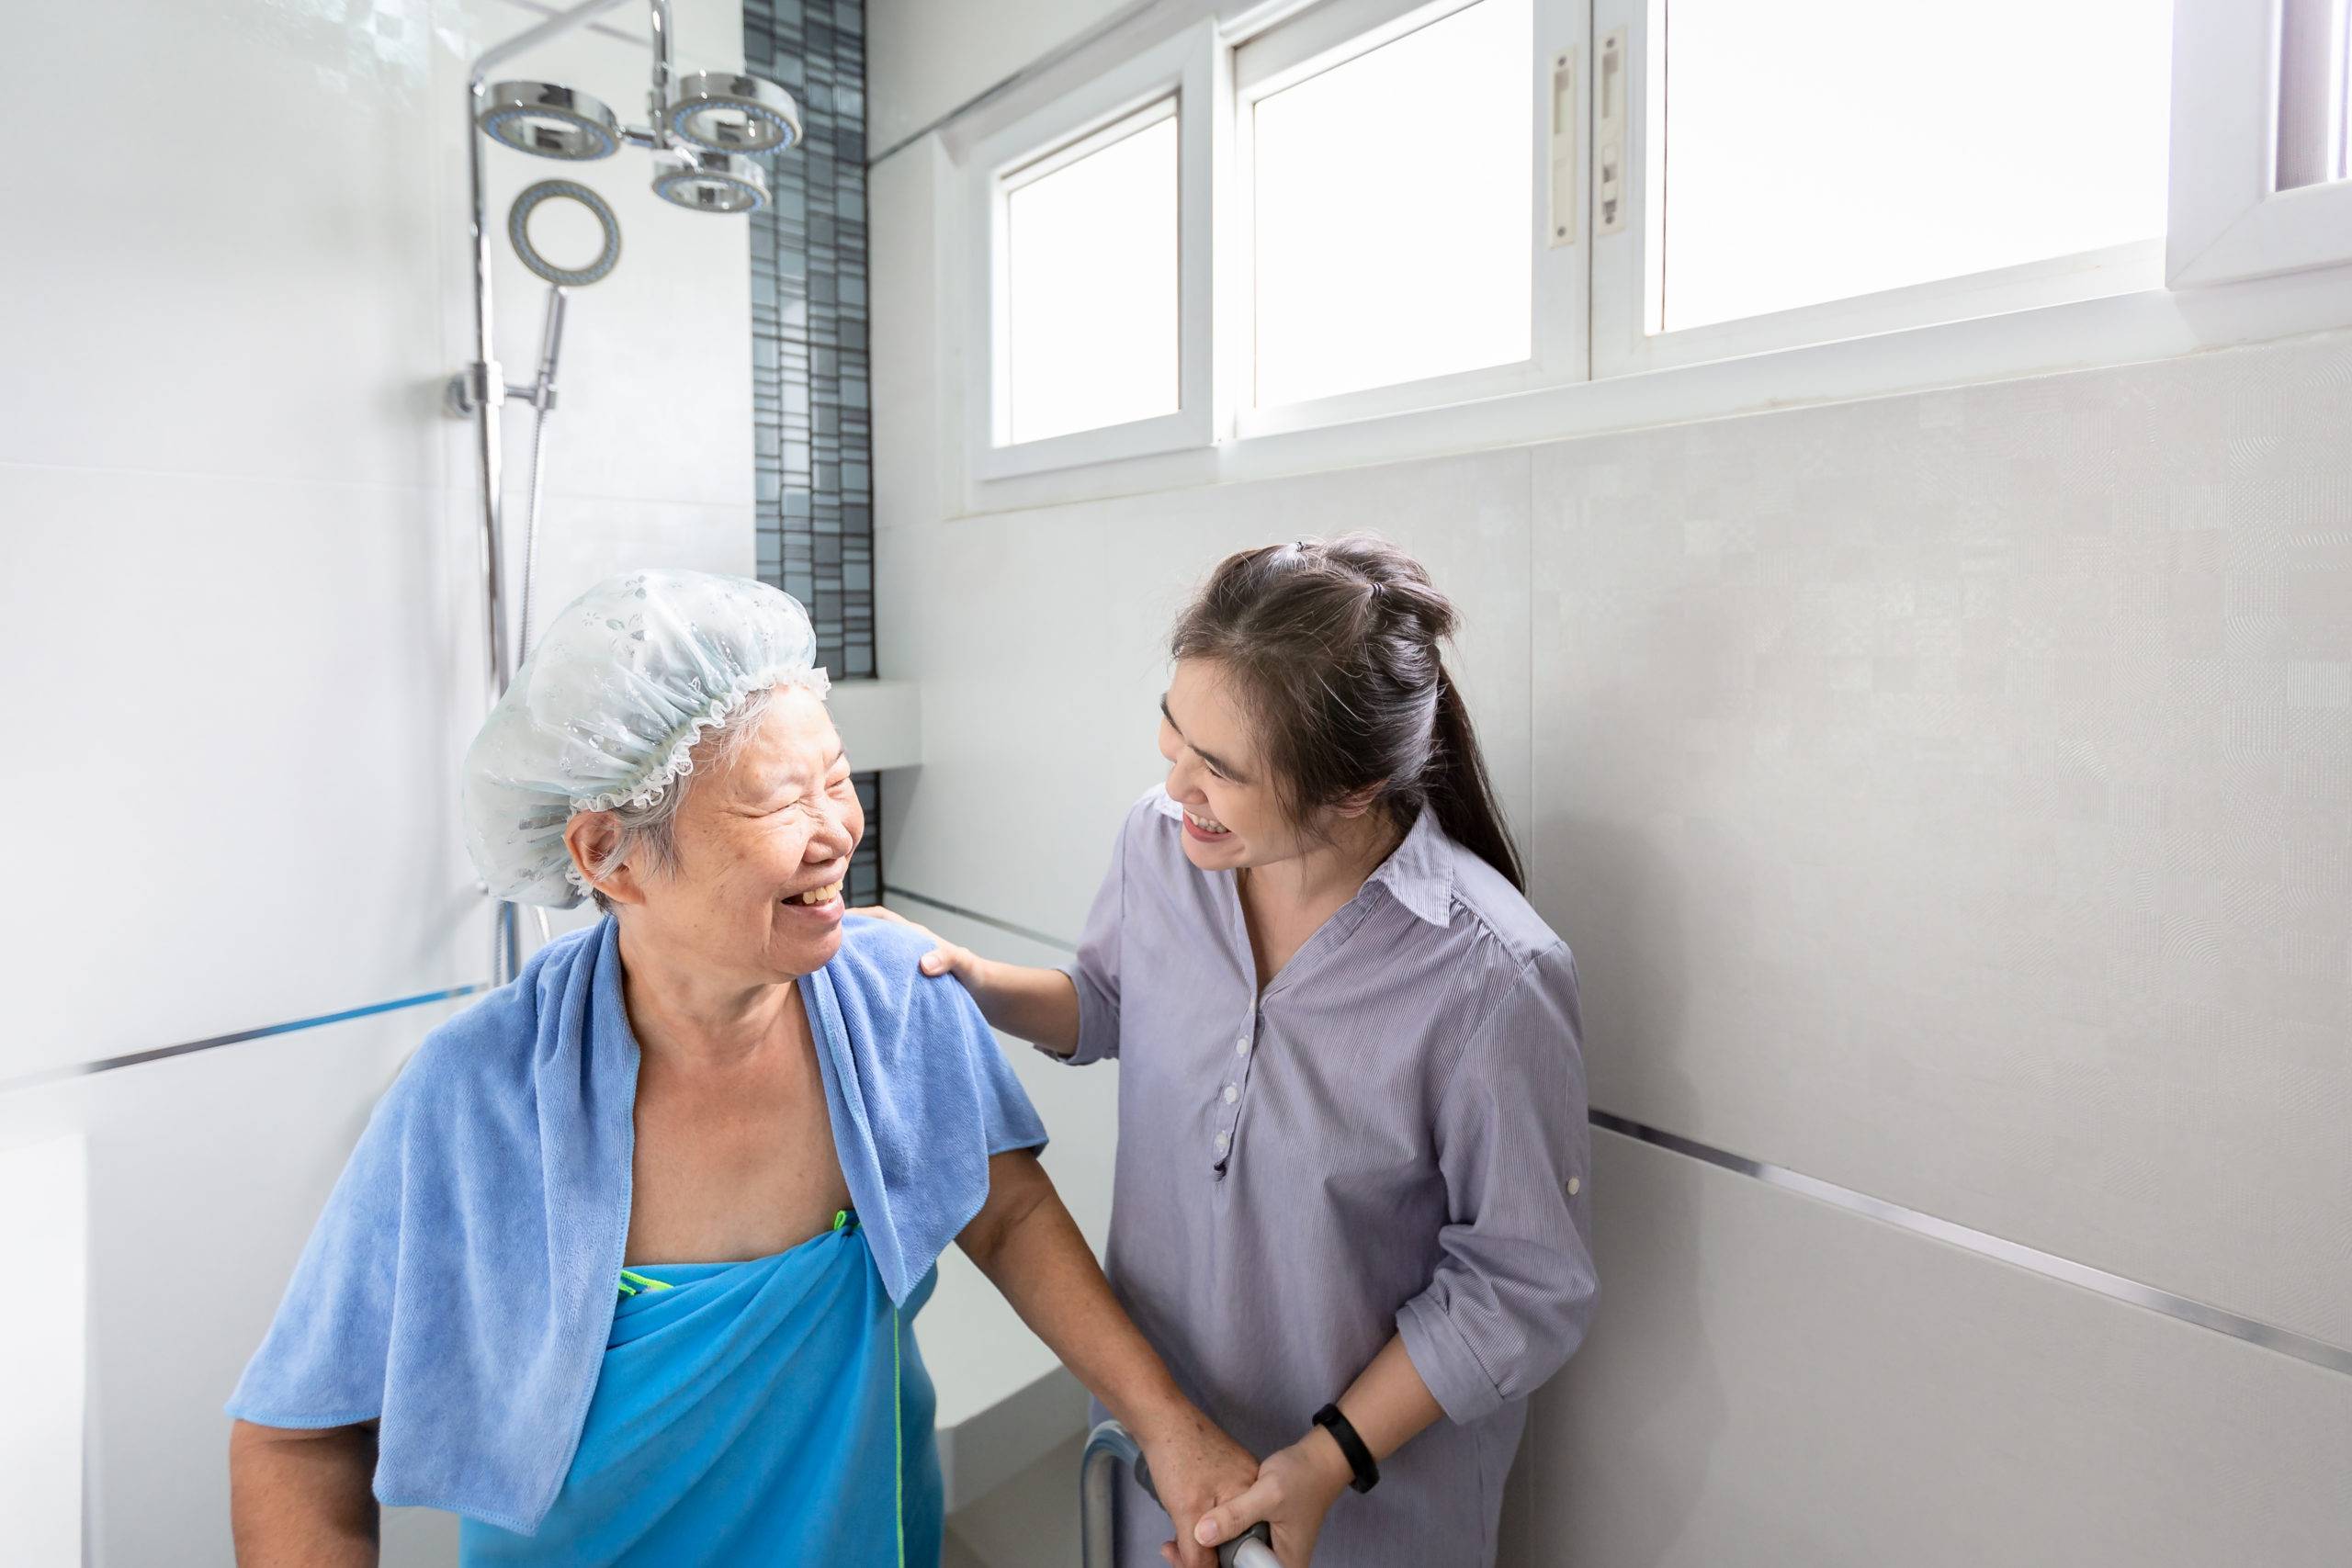 Asian daughter helps elderly mother out of shower